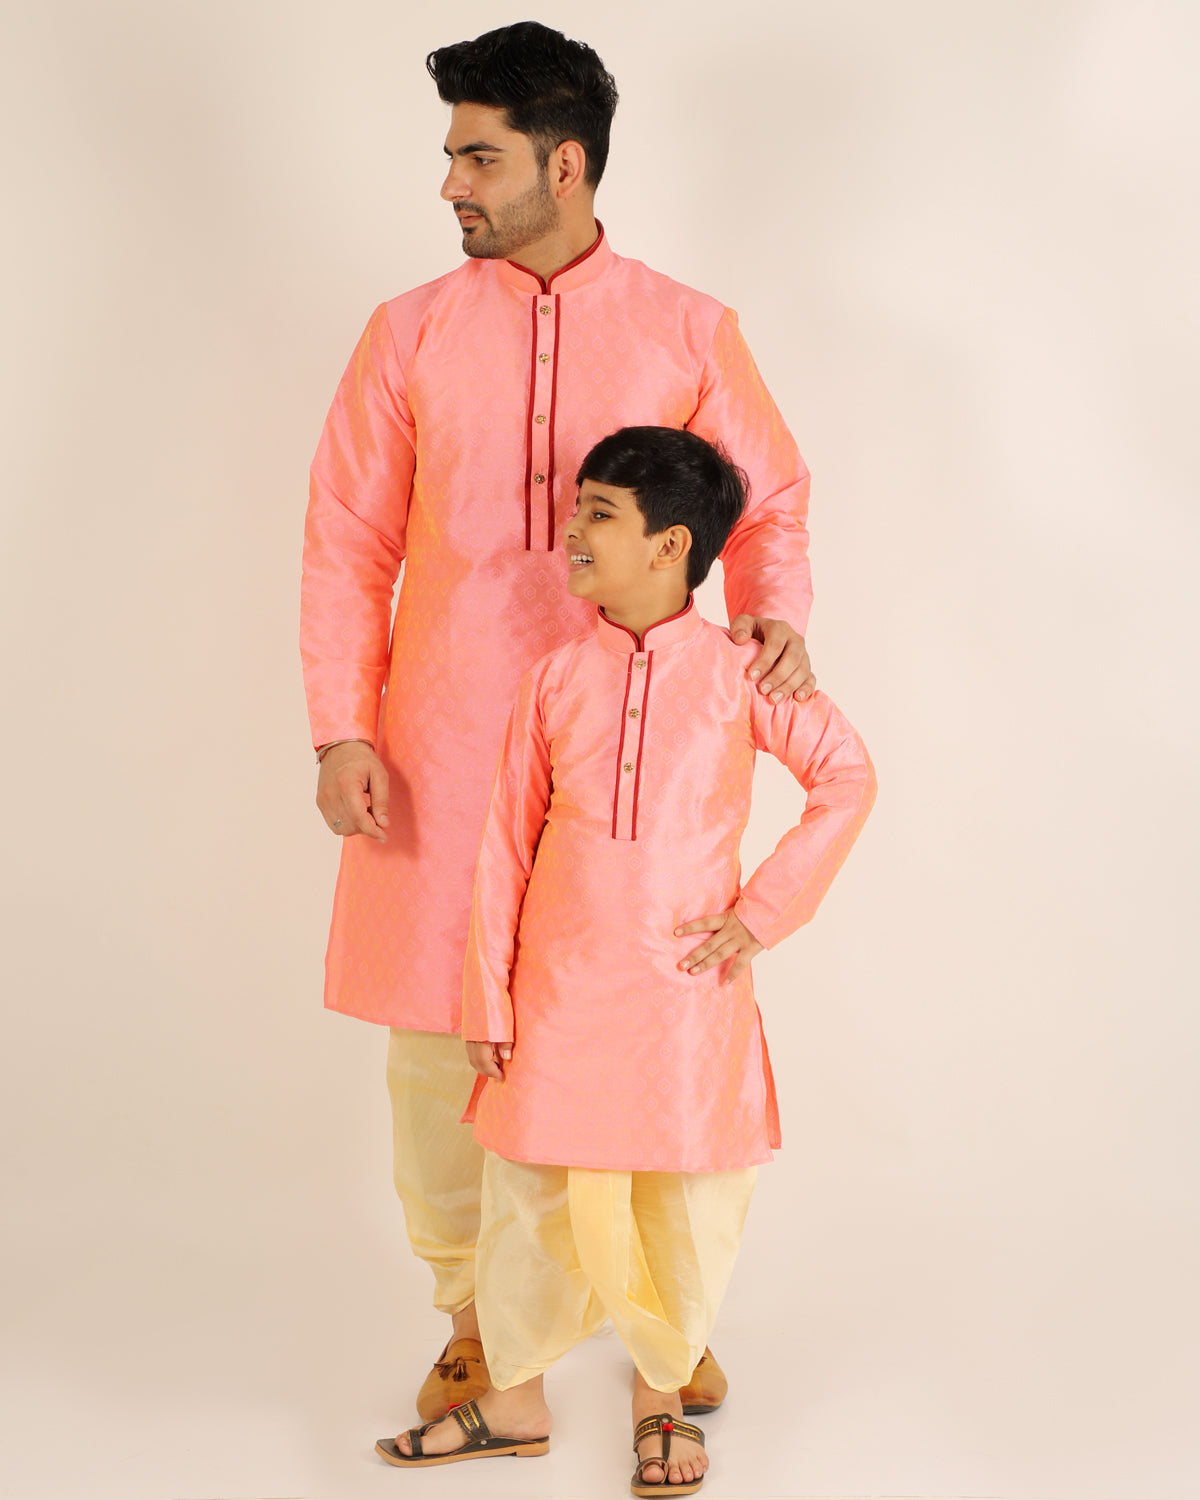 Buy Resham Father and Son Matching Outfits Online | G3fashion.com